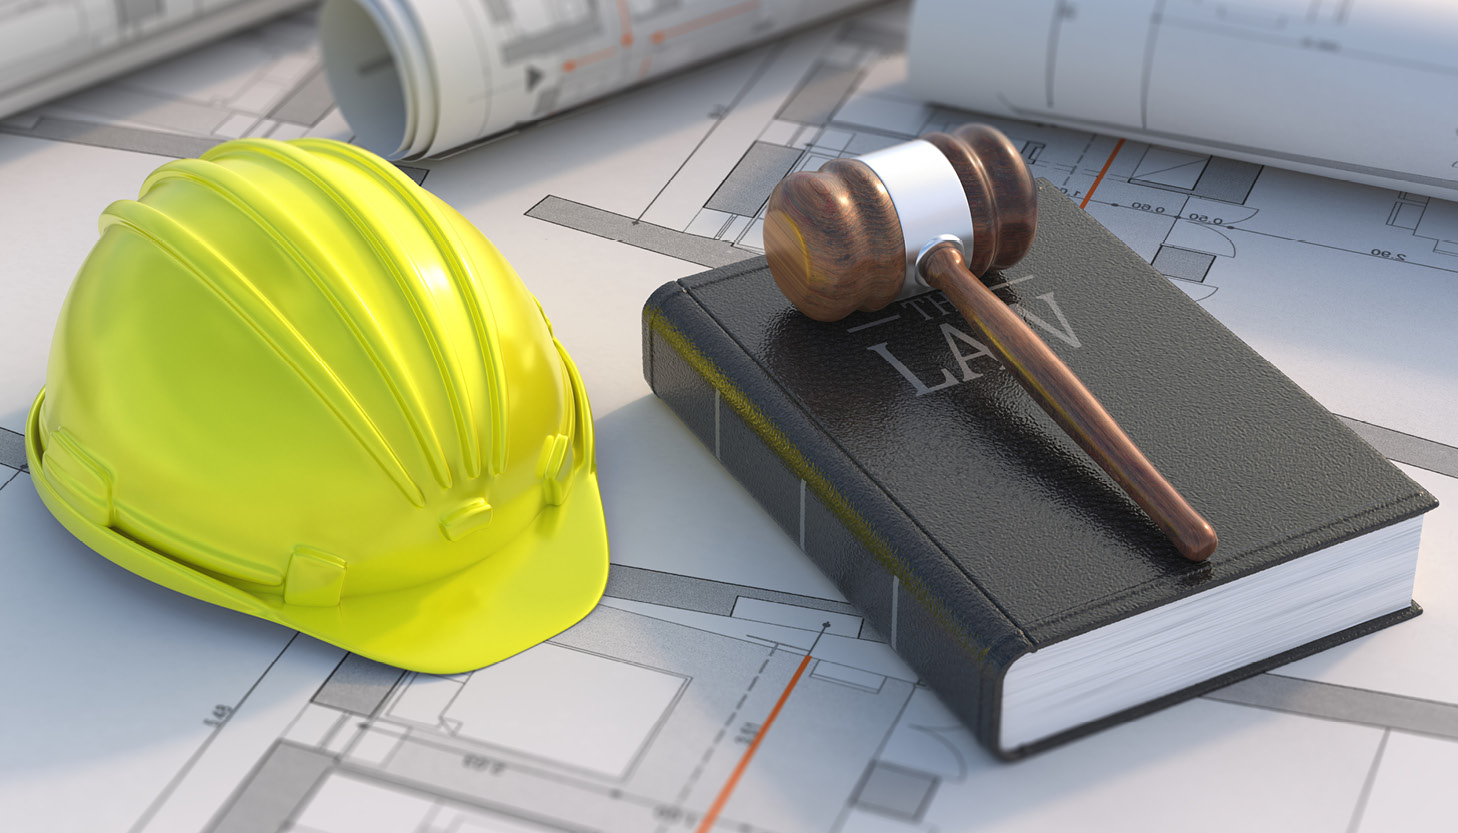 RE&C In Review: Design Professionals Will Be Granted Lien Rights on Commercial Projects Under Senate Bill 49